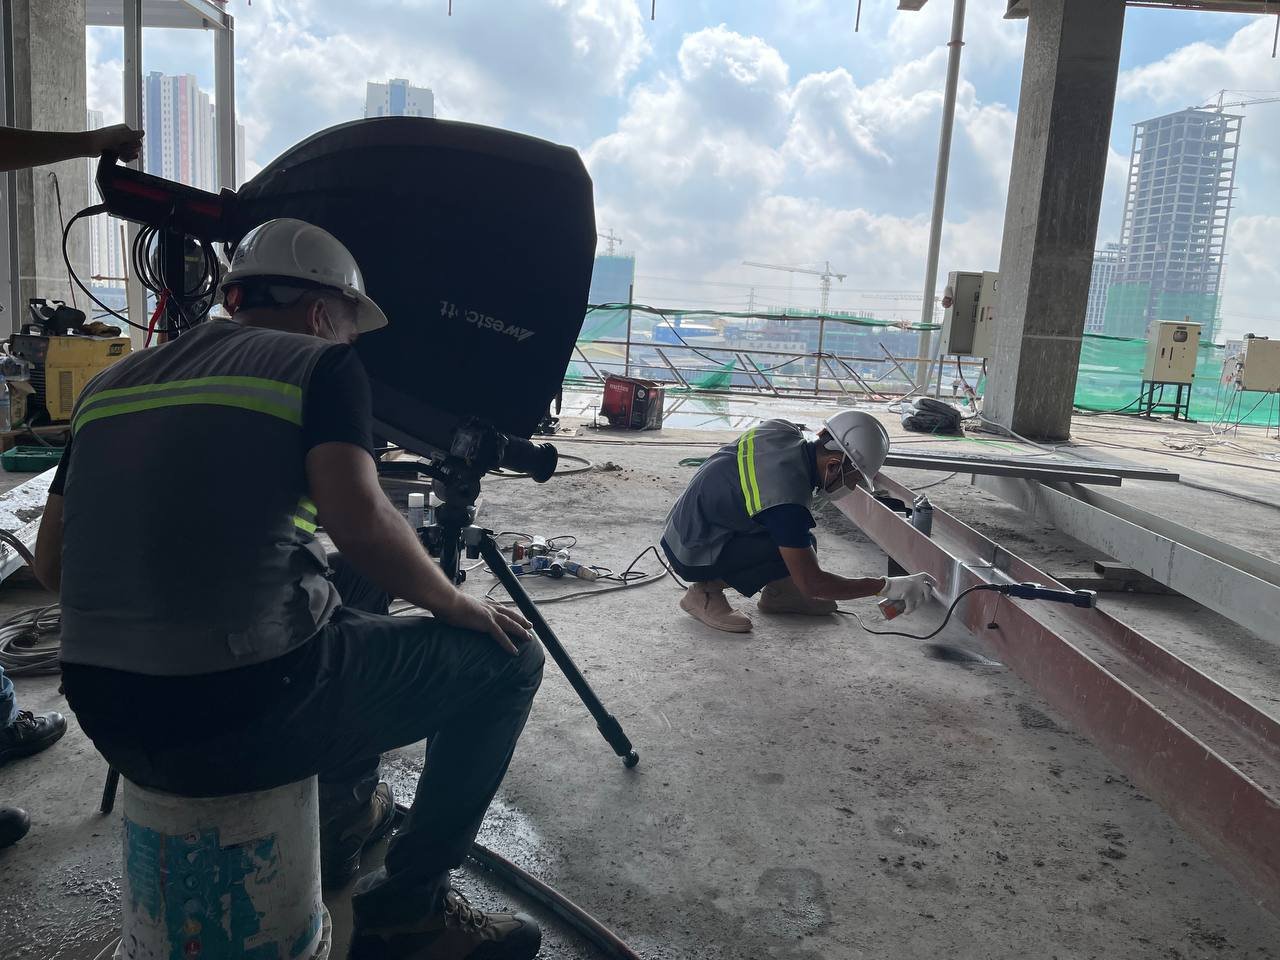 George filming a wide shot of non-destructive steel testing on a building site in Phnom Penh for a corporate video